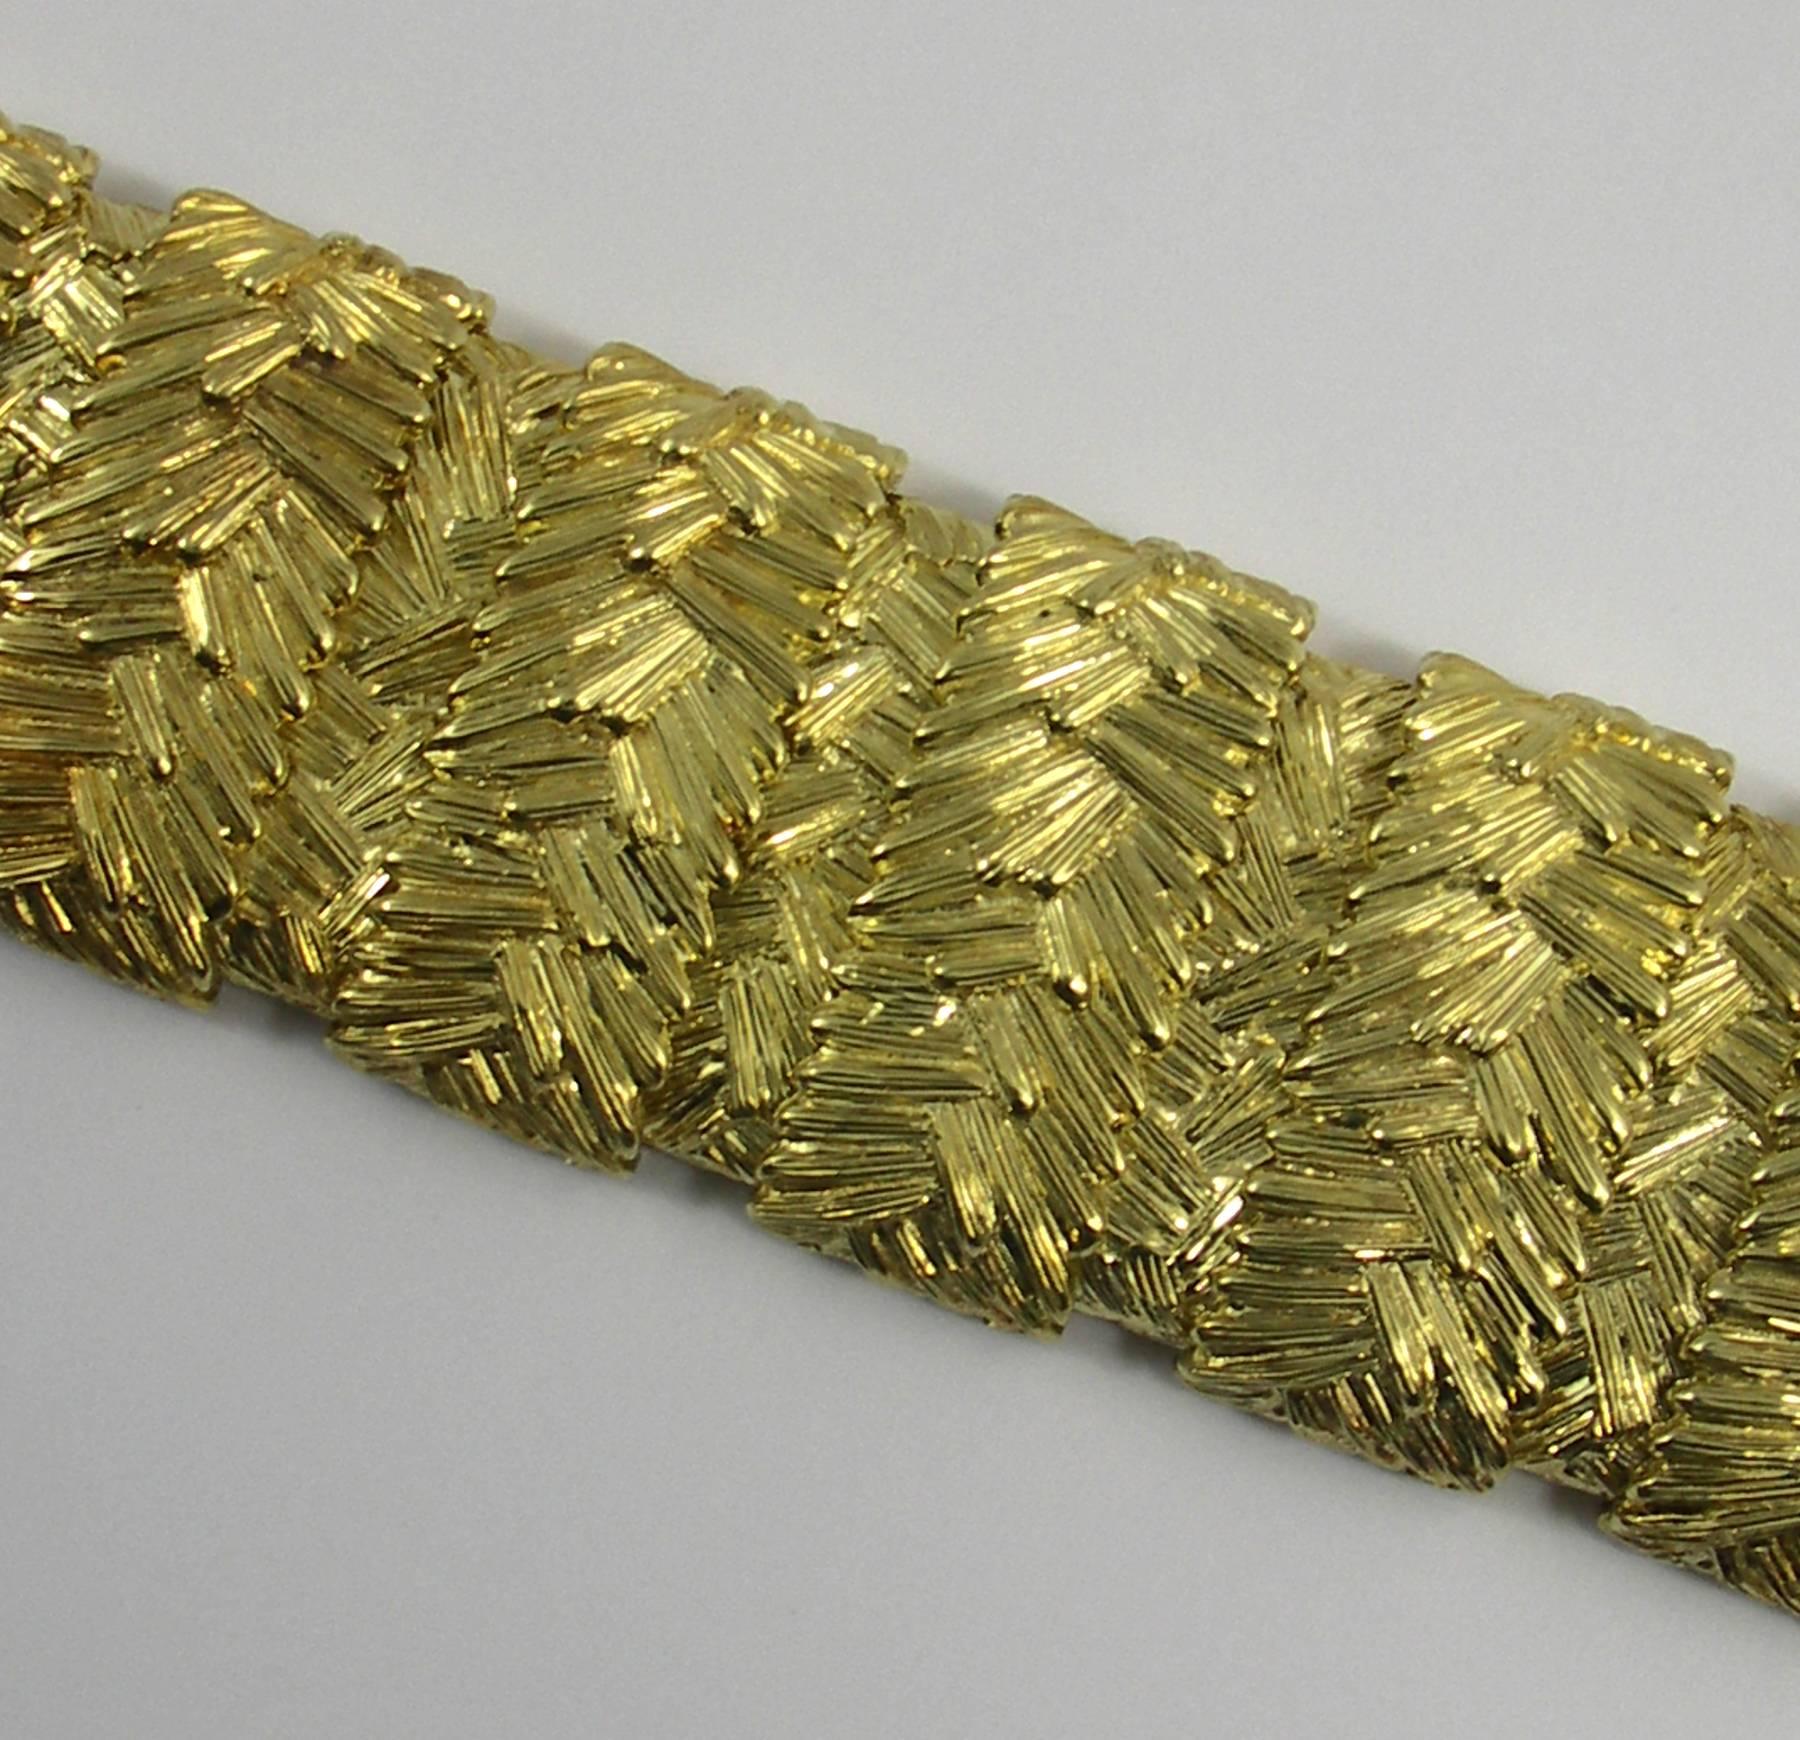 An 18K yellow gold bracelet, measuring 1 1/2 inches wide, and comprised of highly textured, track-like links, in order to create a cuff-like fit. Inside circumference is 6 1/4 inches. 